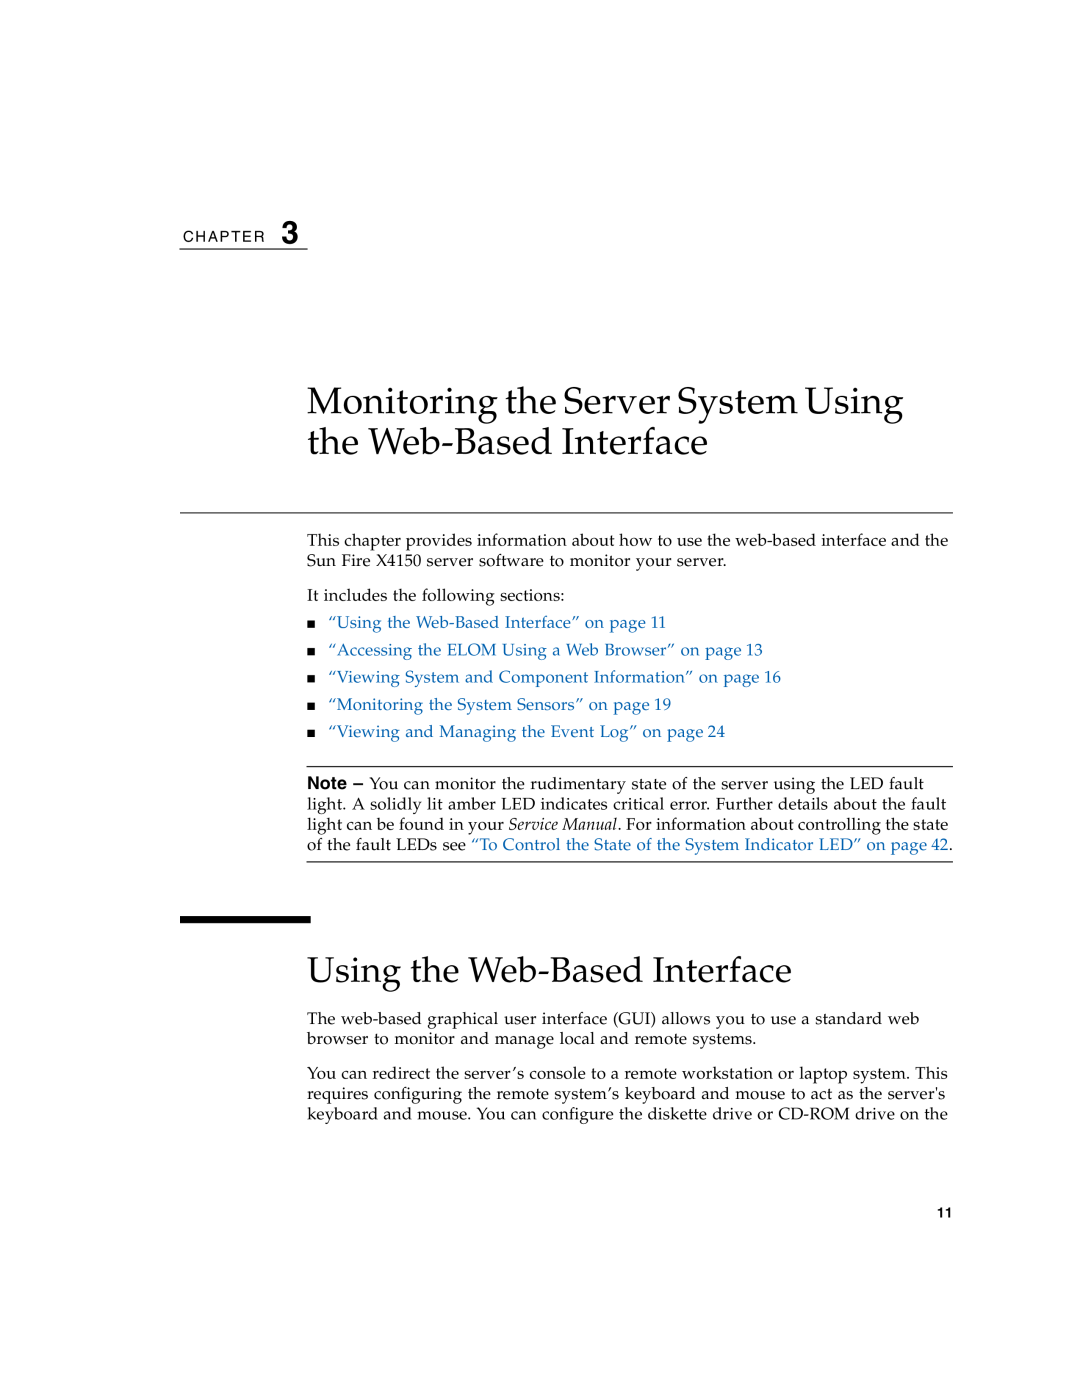 Sun Microsystems X4150 Monitoring the Server System Using the Web-Based Interface, “Using the Web-Based Interface” on page 